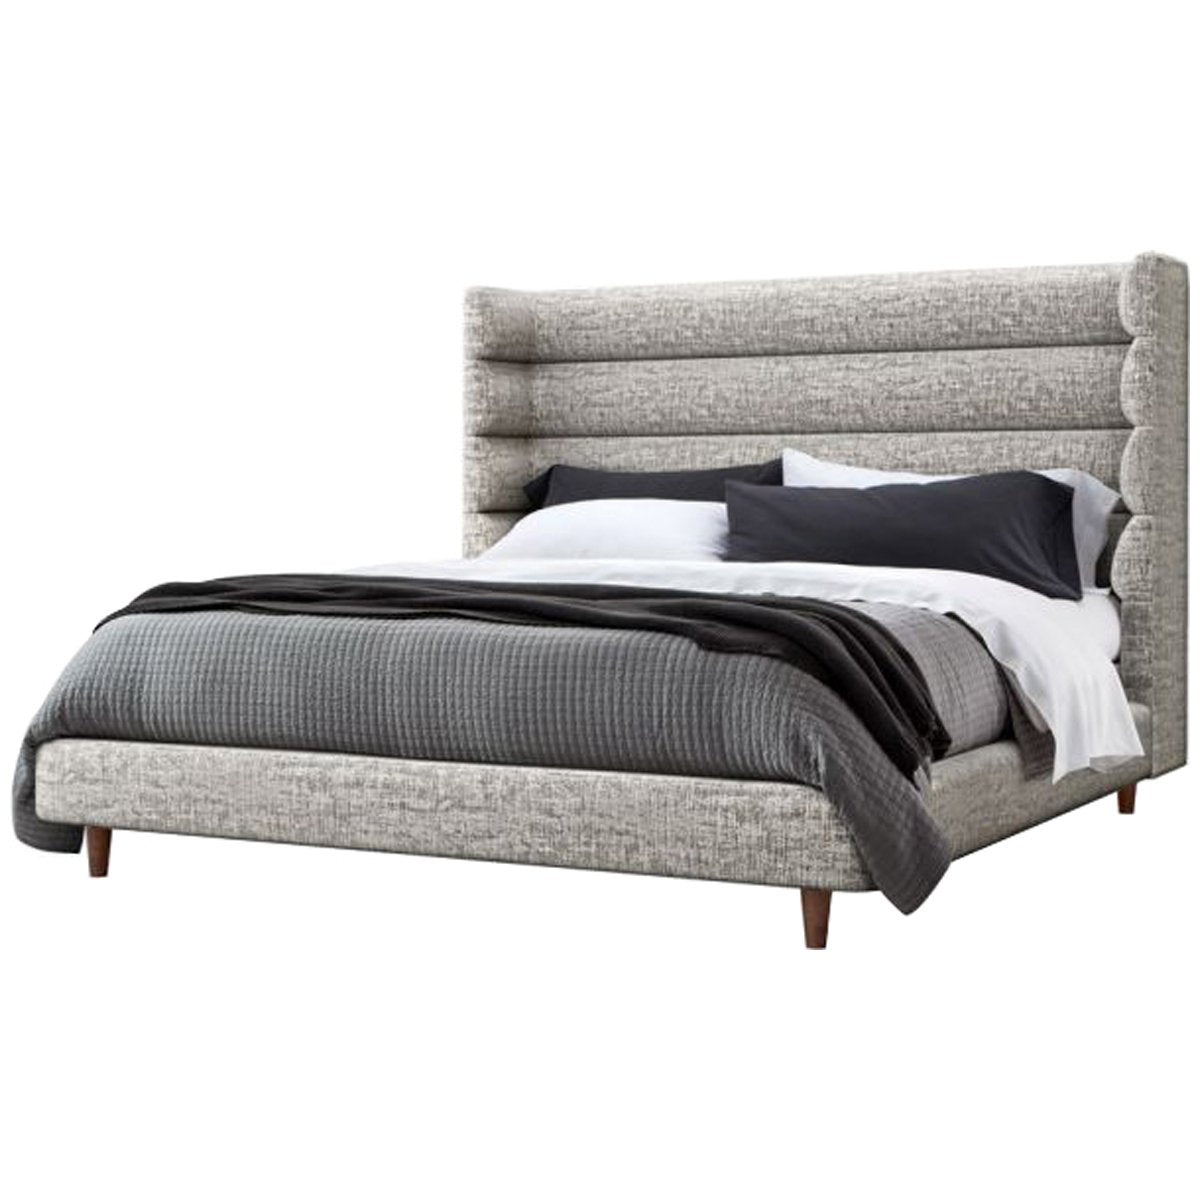 Interlude Home Ornette Bed - Heathered Chenille